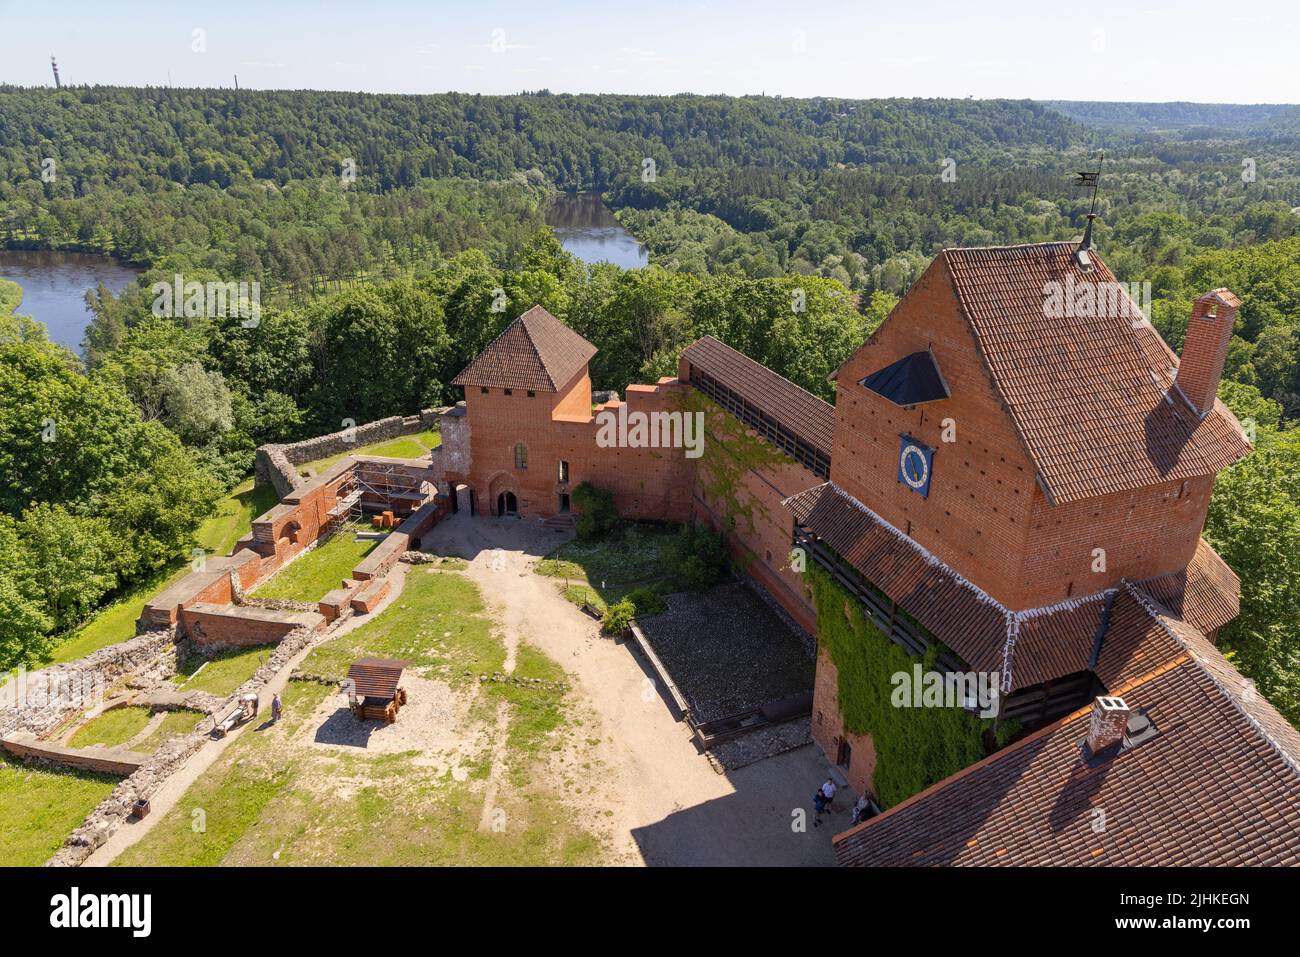 Medieval Castle; 13th century Turaida Castle, view seen from above, from the top of the castle tower, Turaida Latvia Europe Stock Photo